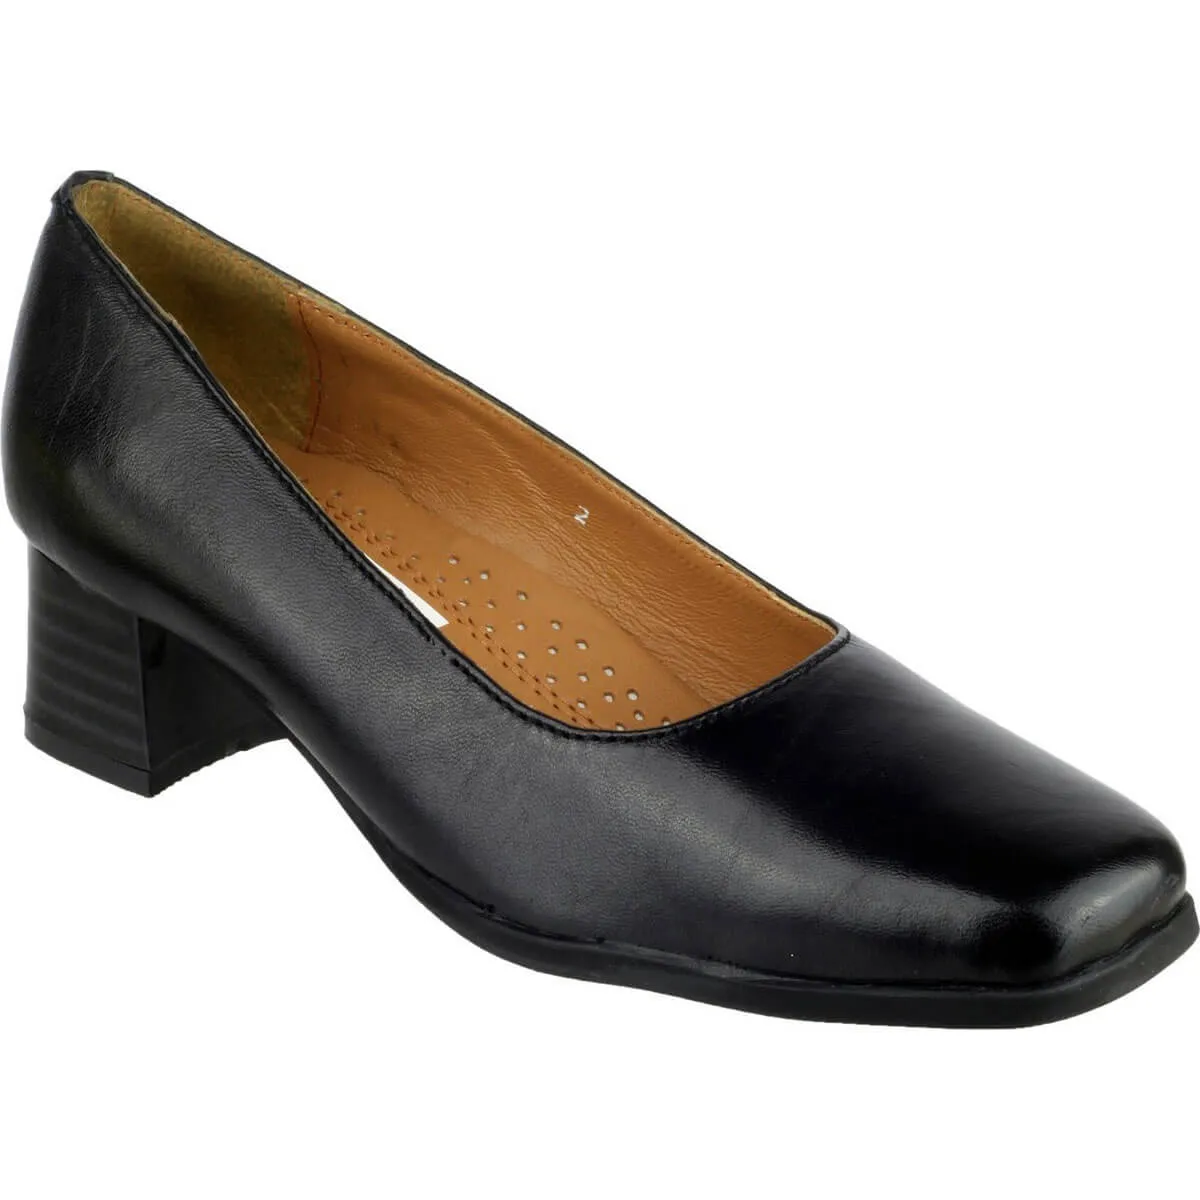 Amblers Walford Ladies Shoes Leather Court - Black, Size 6.5